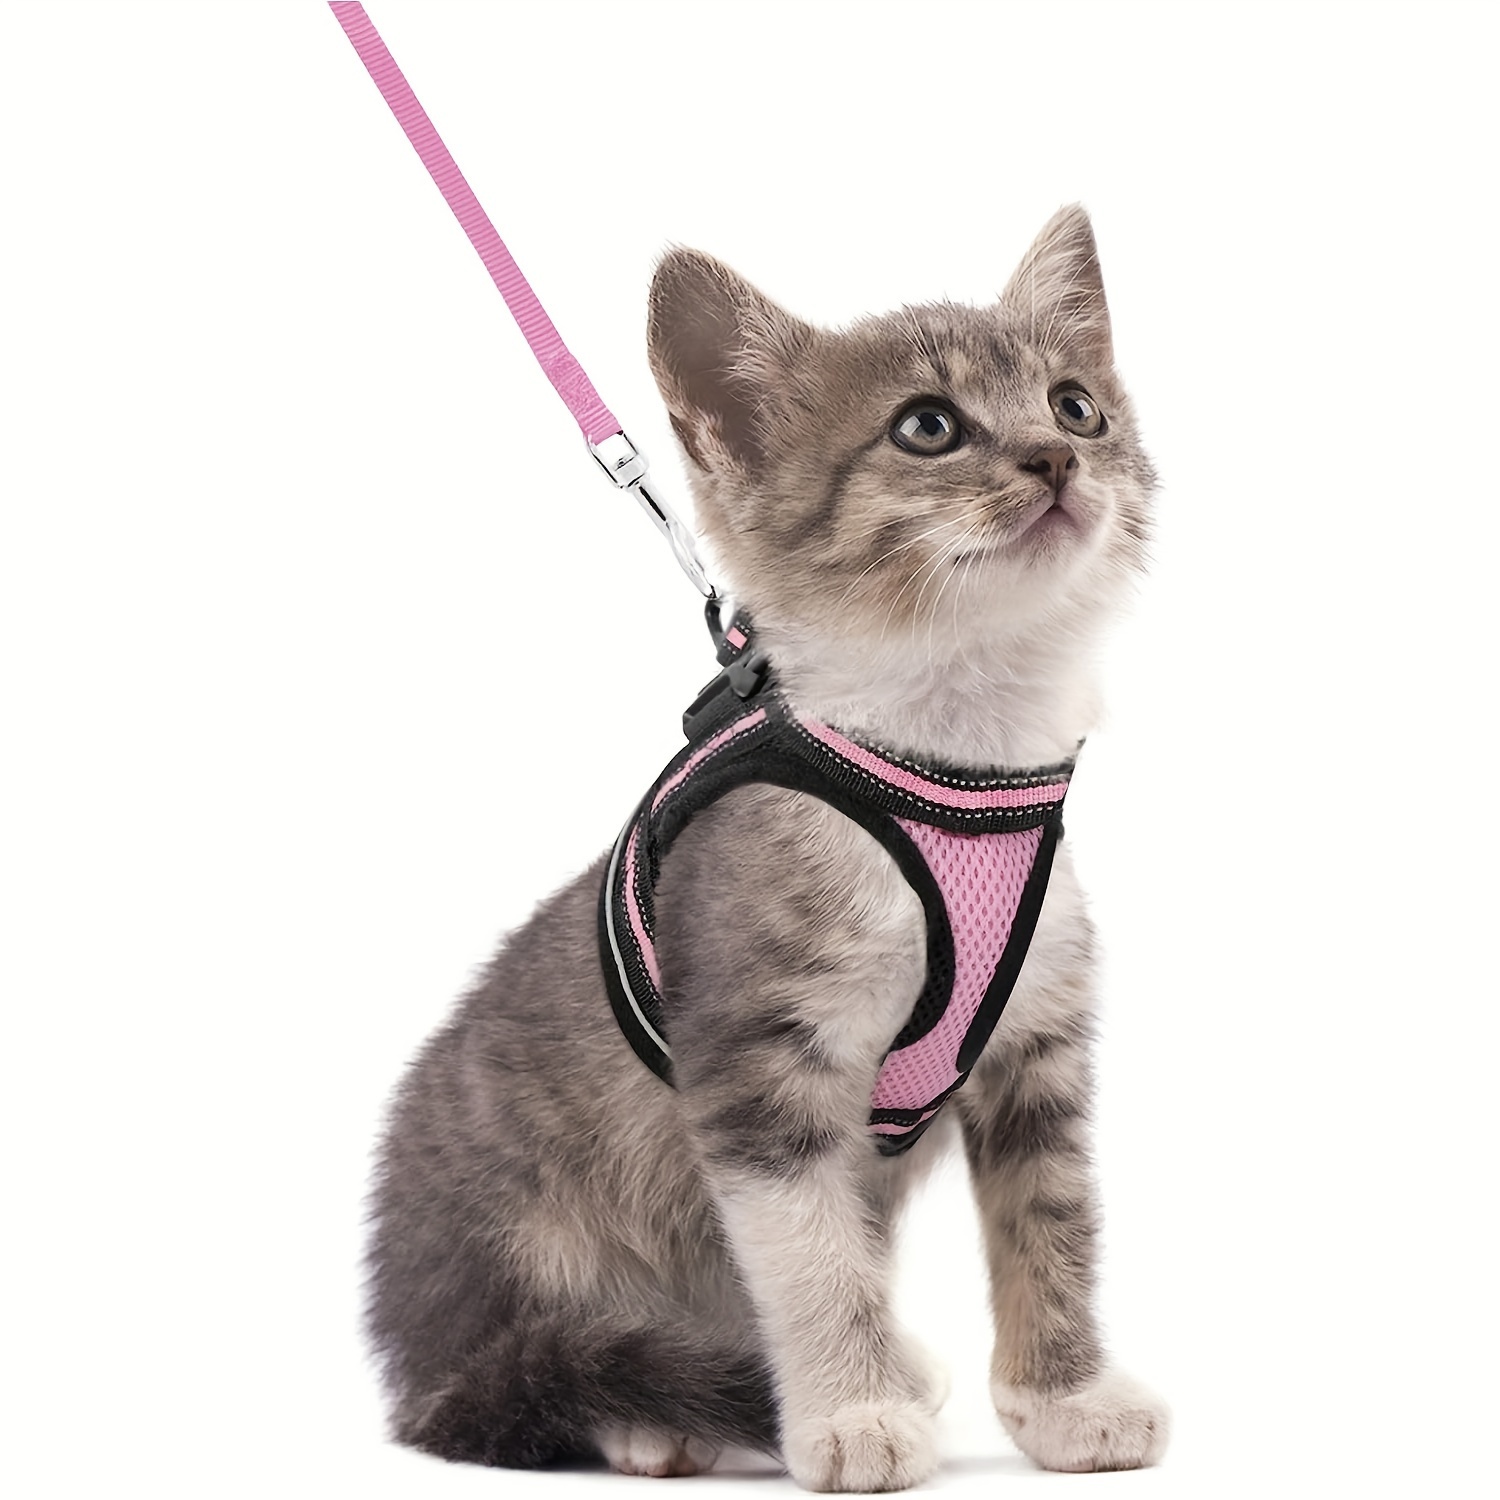 

Escape Proof Cat Harness With Reflective Strip, Adjustable Soft Polyester Vest For Kittens, Comfortable Outdoor Walking Leash Set With Quick-release Buckle, Hand Wash Only